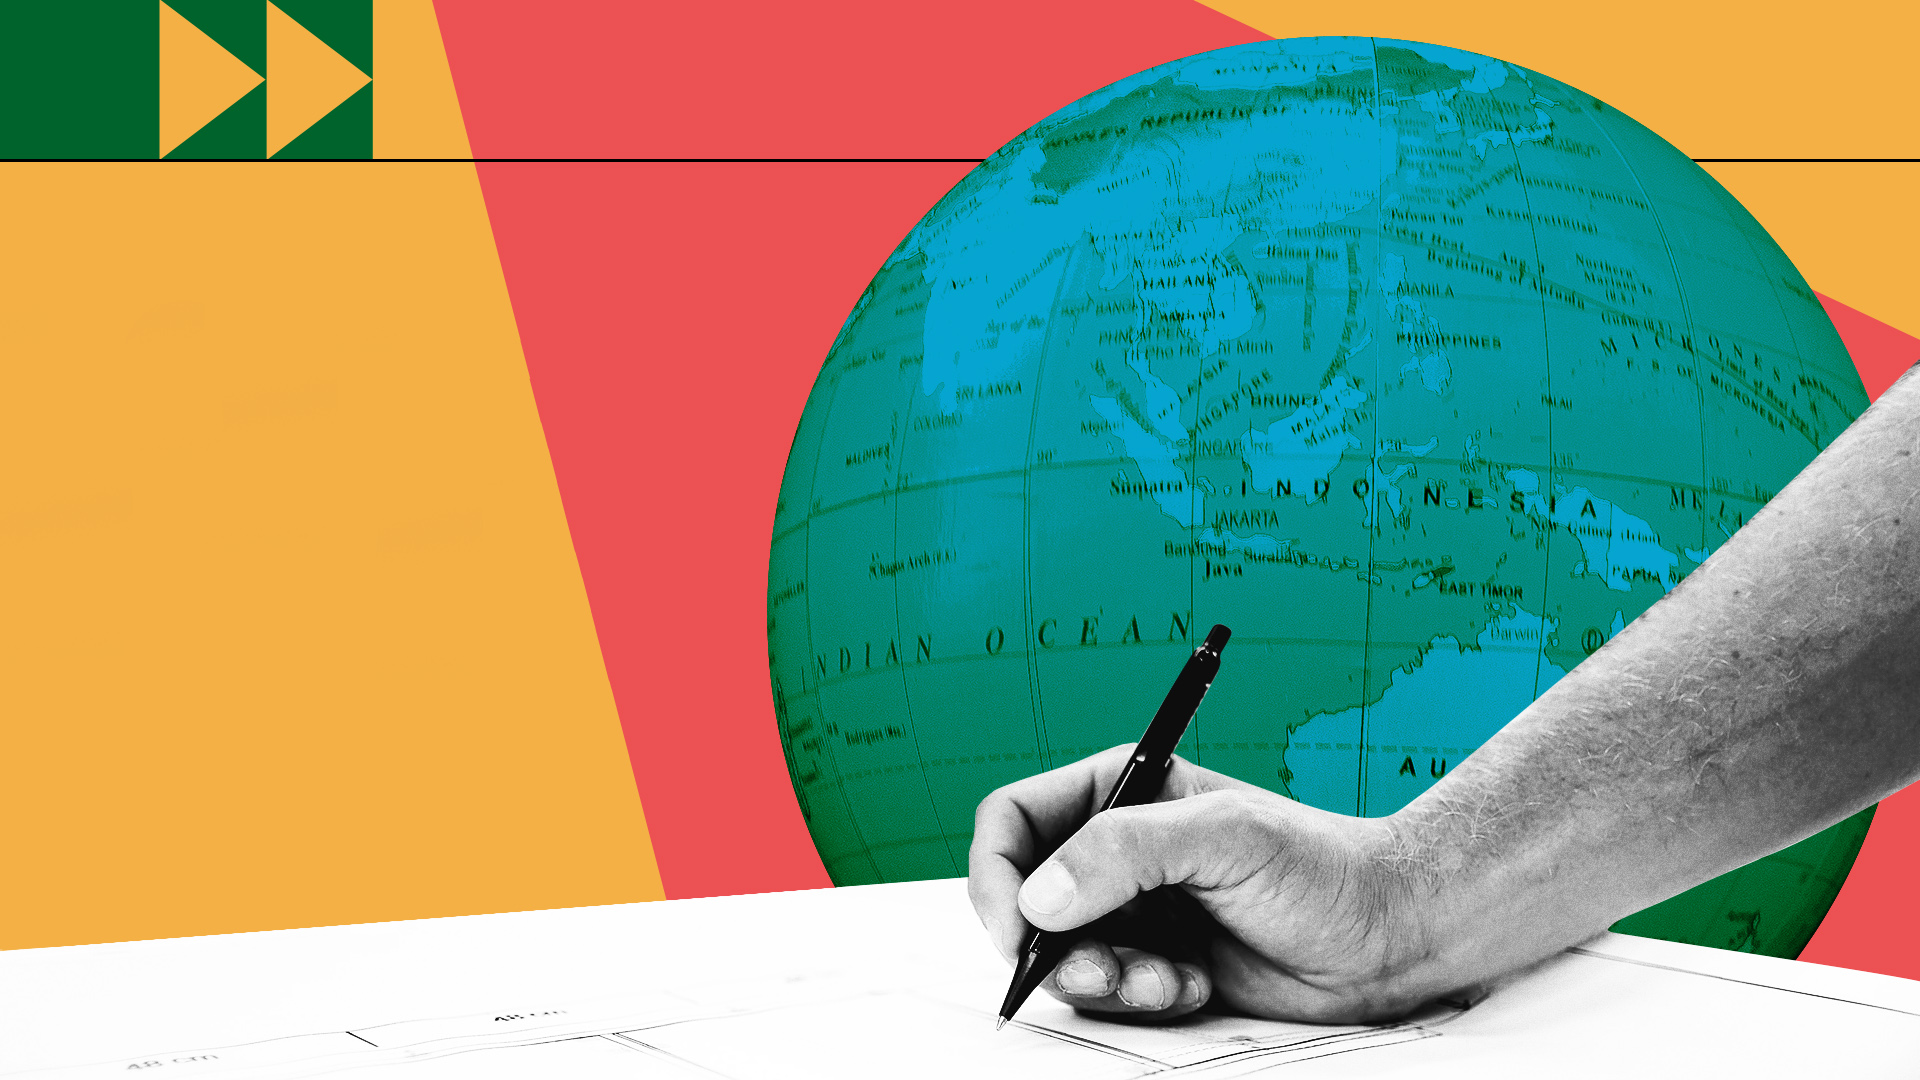 photocomposition: the earth globe on the backgroung, a hand holding a pen signing a document on the front